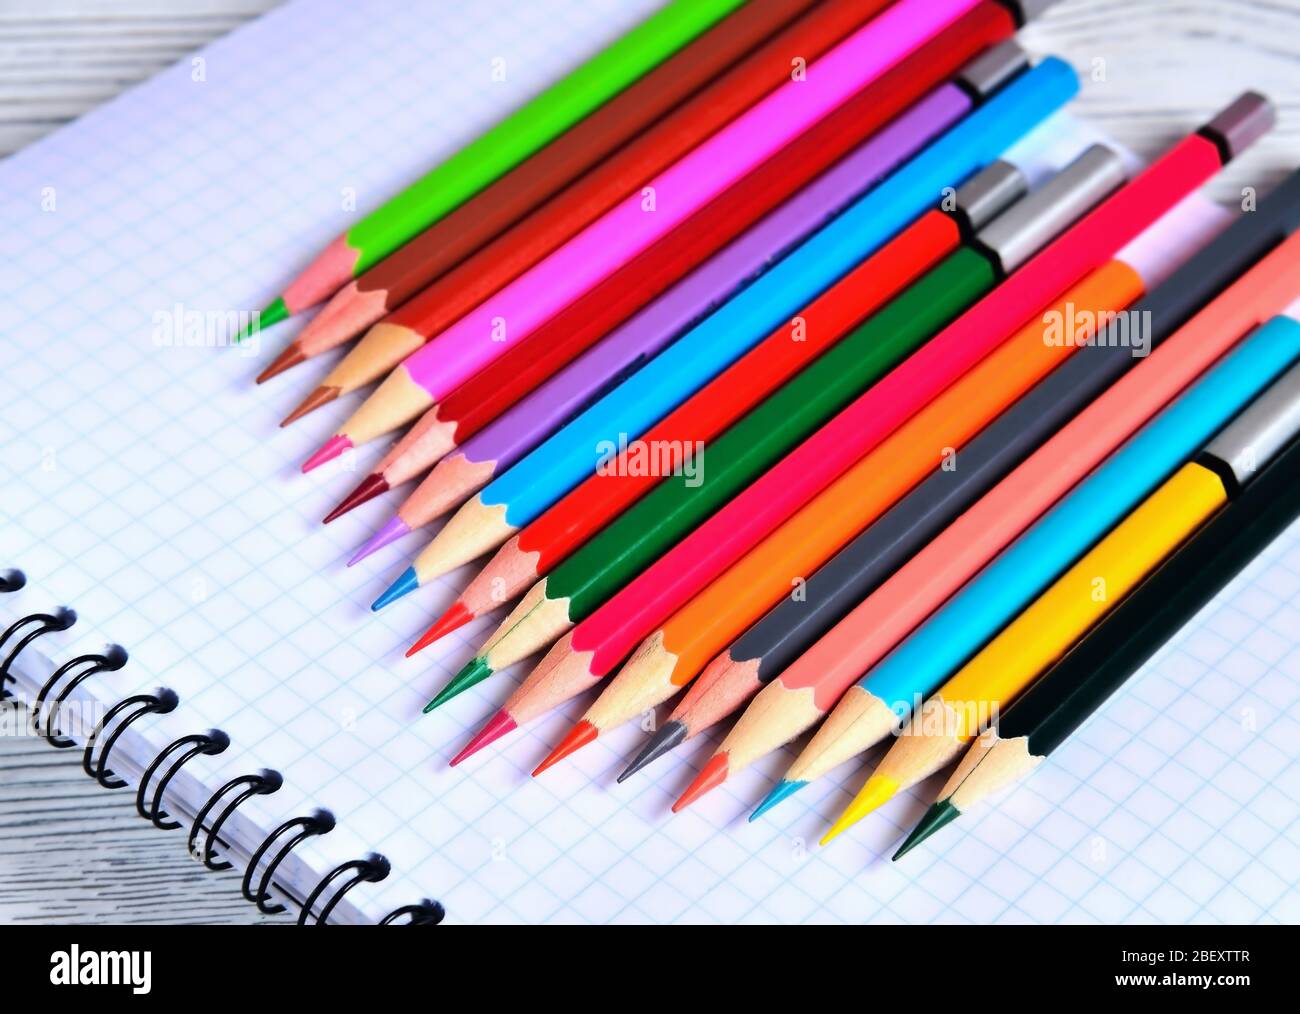 Art Sketchpad Colored Pencils Stock Photo - Image of blank, showing:  23697008